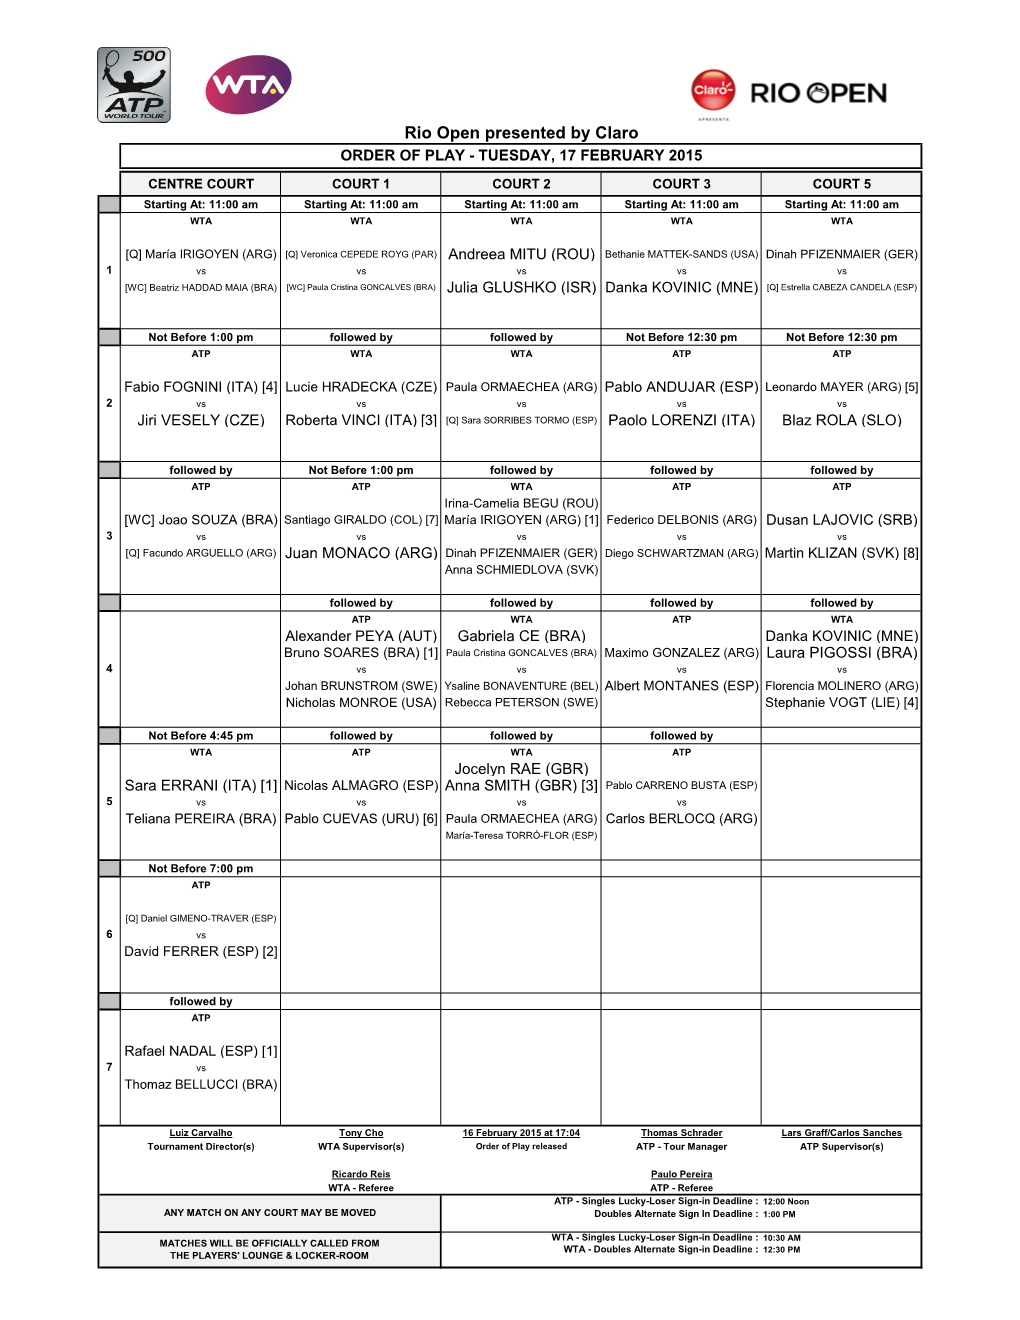 Rio Open Presented by Claro ORDER of PLAY - TUESDAY, 17 FEBRUARY 2015